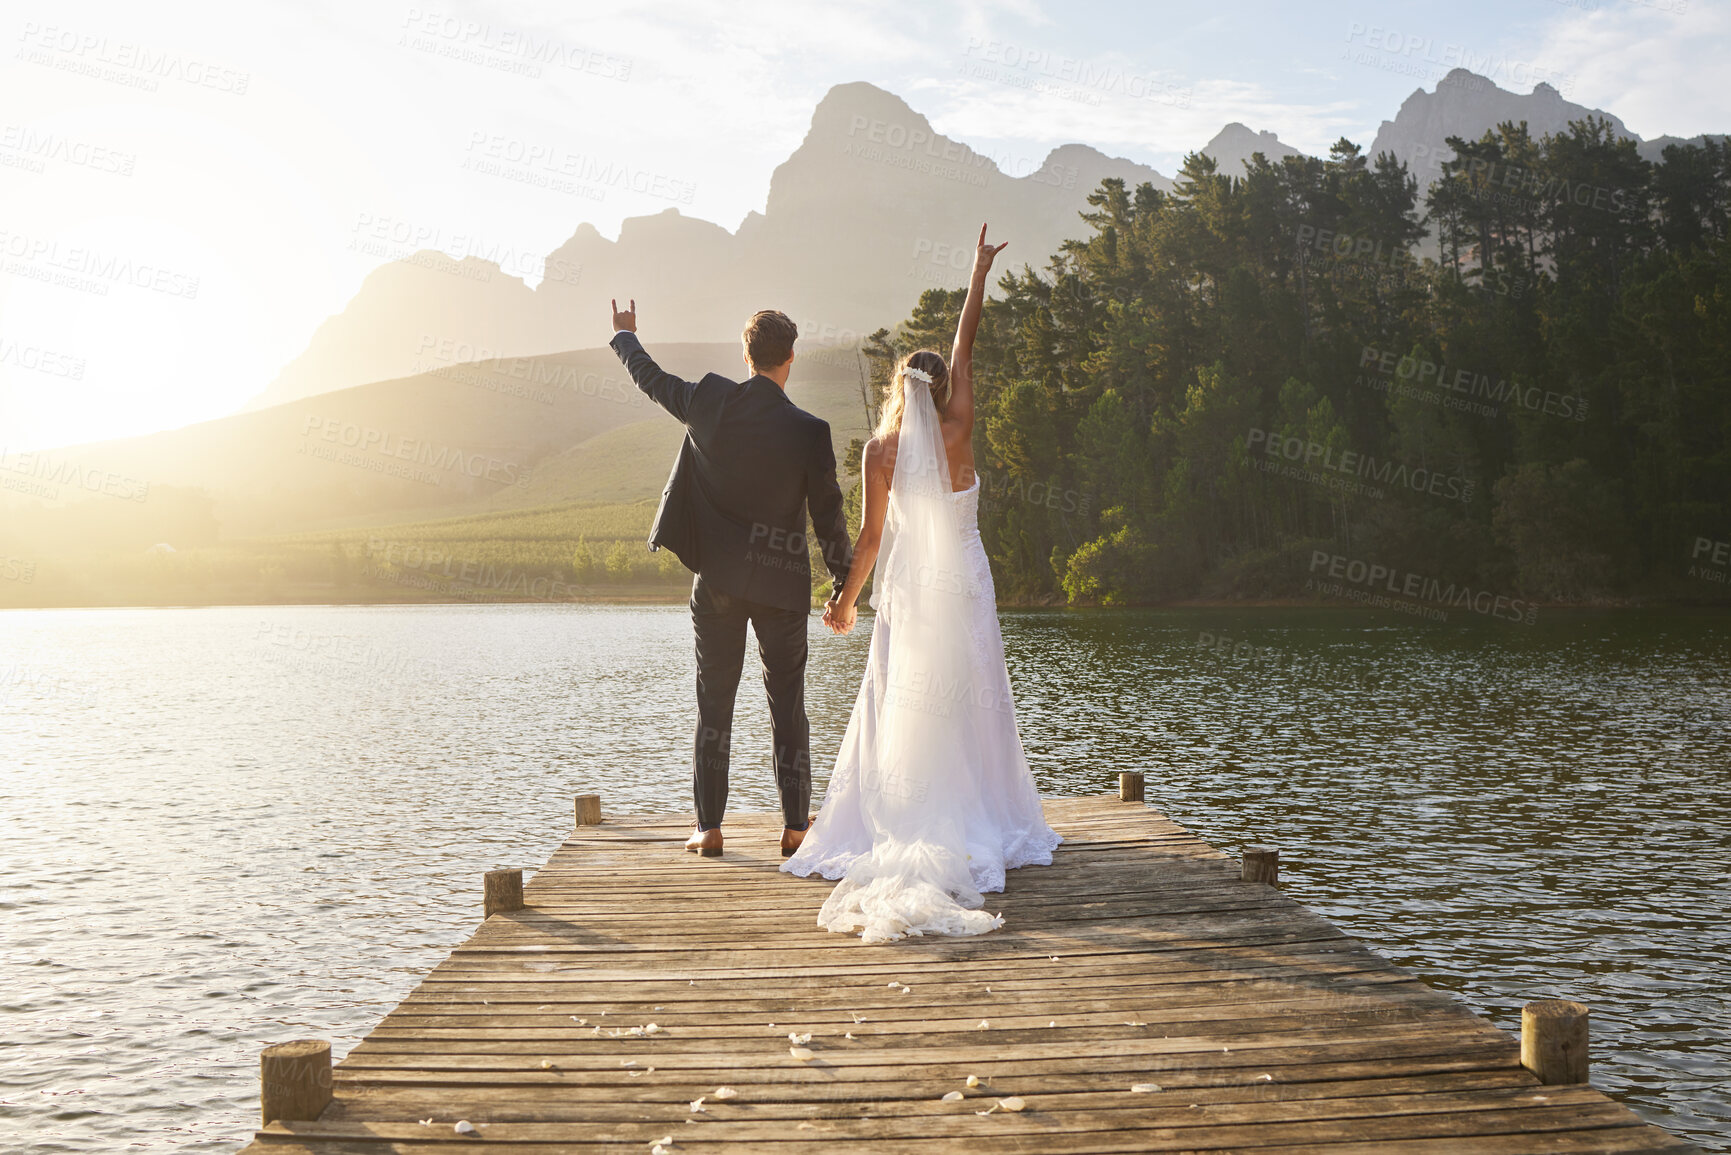 Buy stock photo Love, hand signs and couple by a lake for their wedding standing, bonding and holding hands on the pier. Nature, romance and young bride and groom in funny moment together on a romantic marriage day.